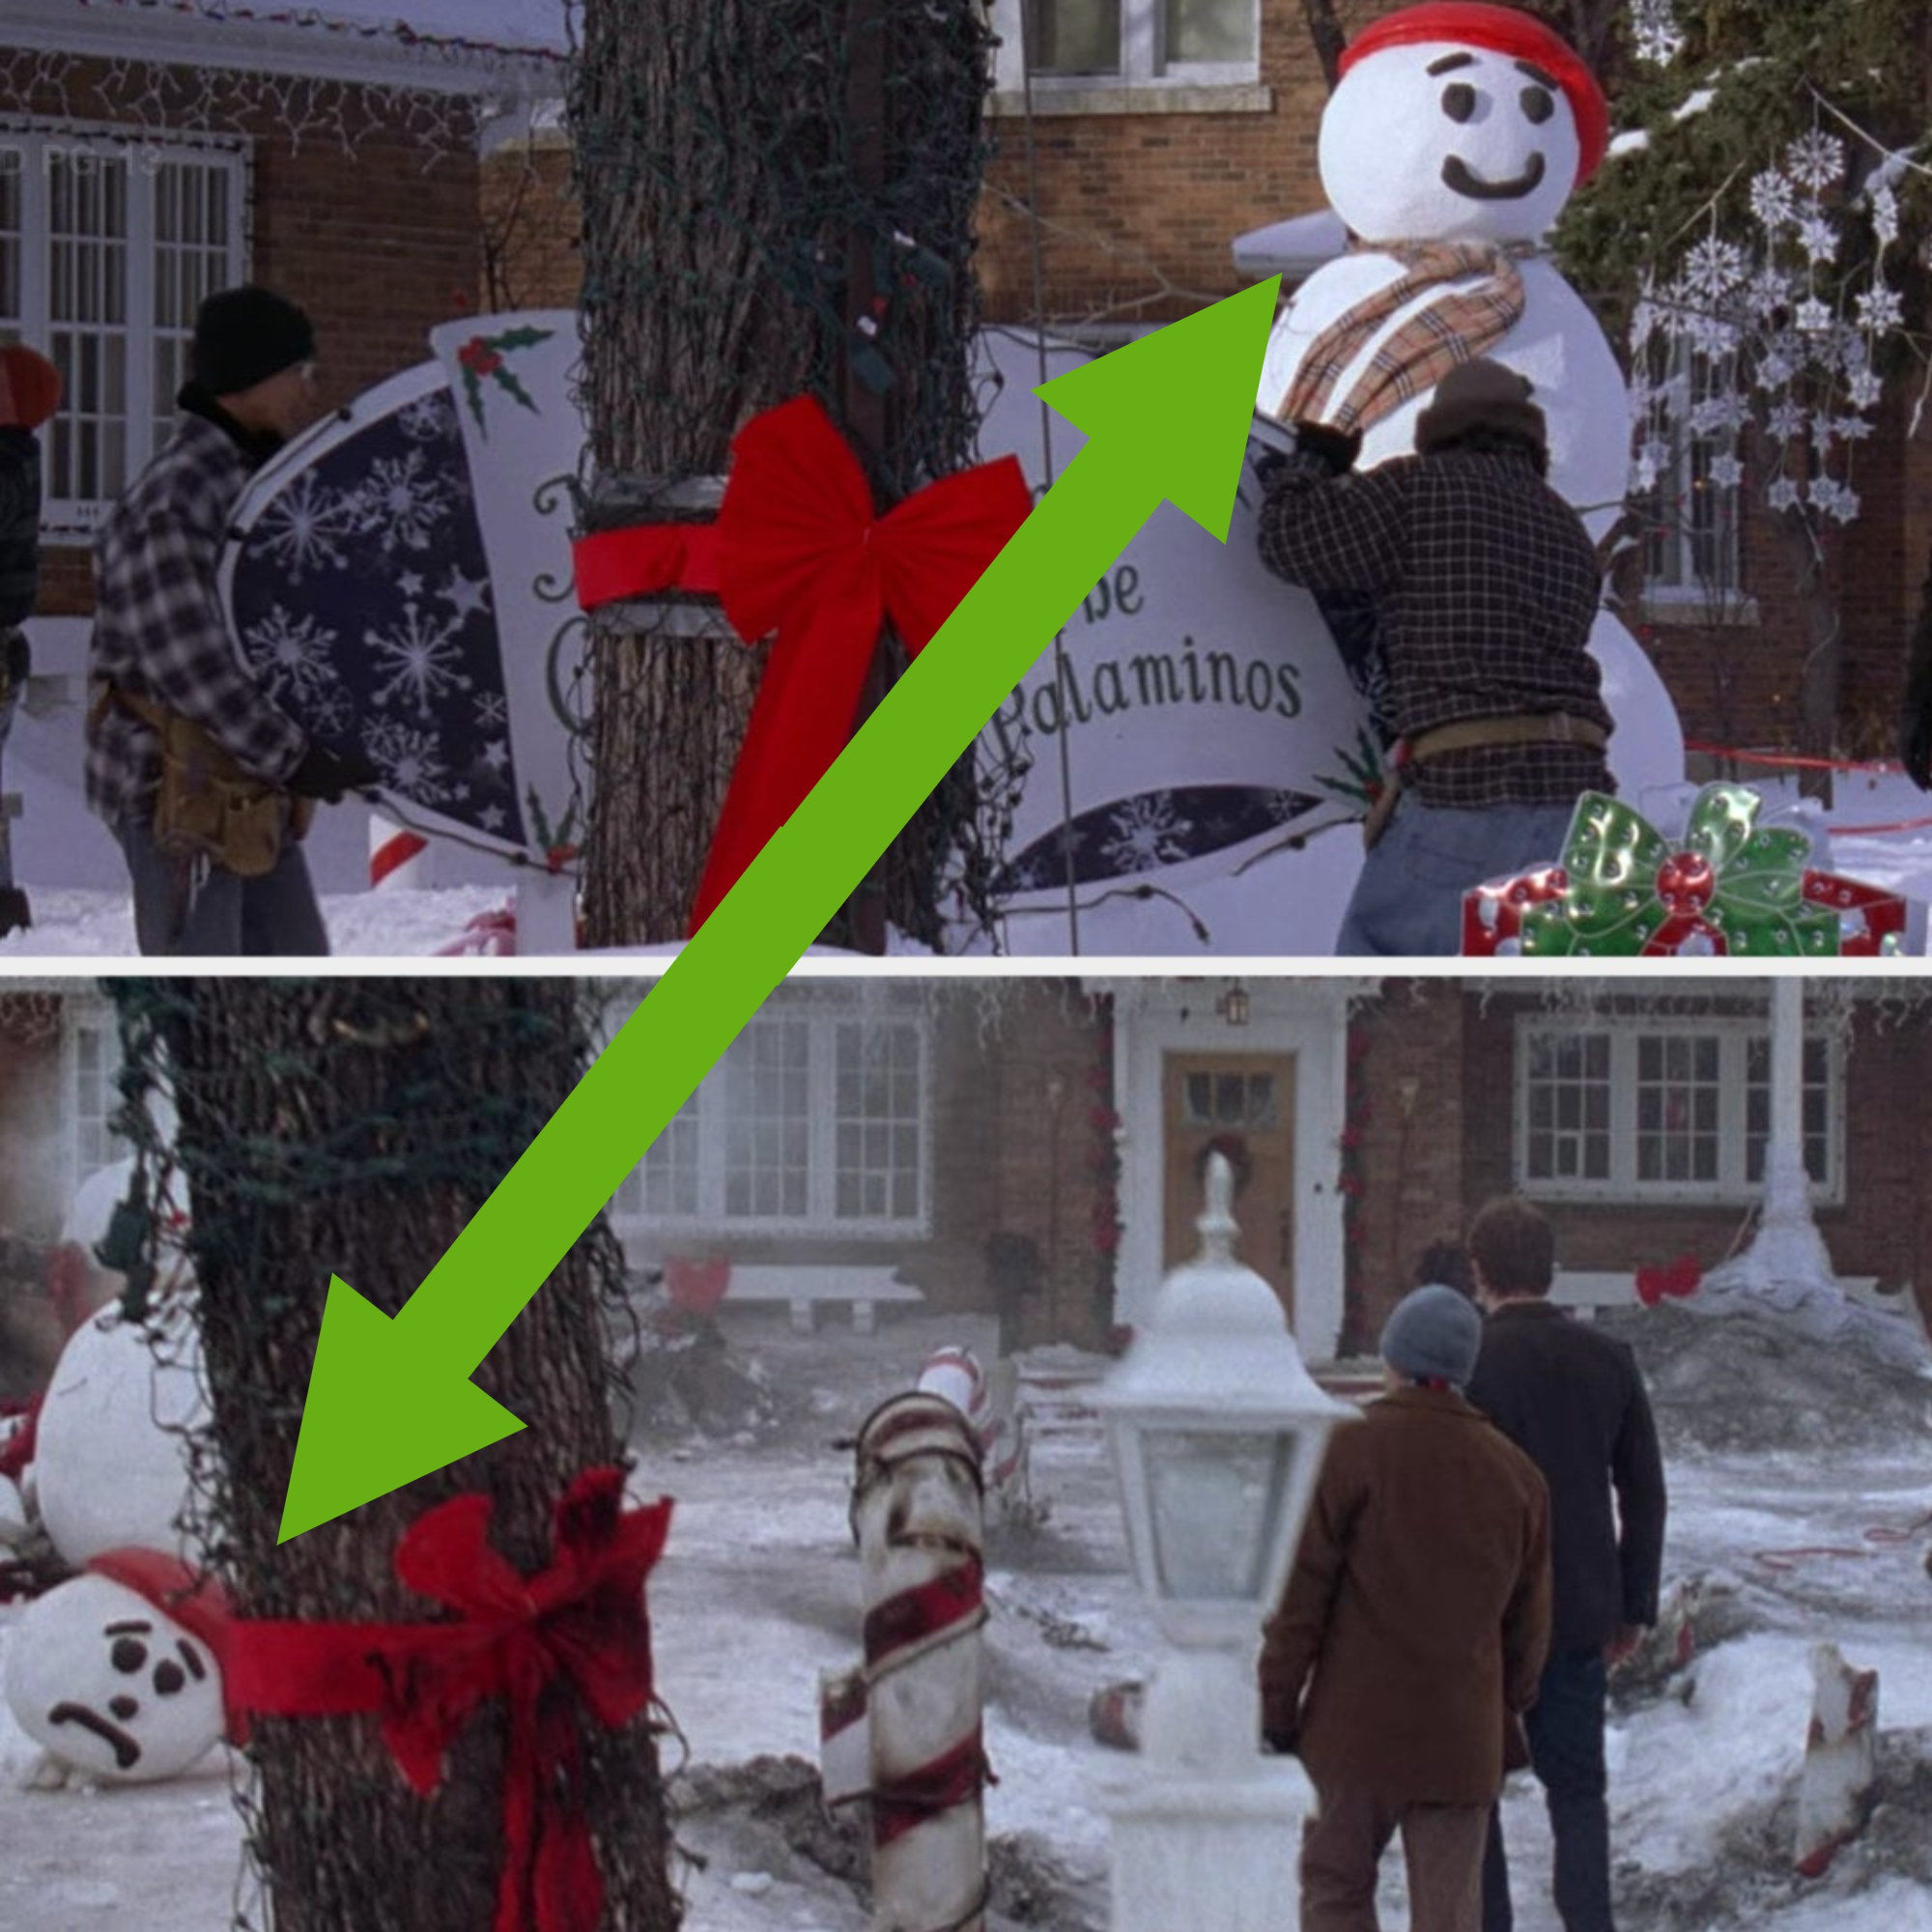 The snowman smiling in the front yard and then the snowman frowning and decapitated in a ruined yard later in the movie